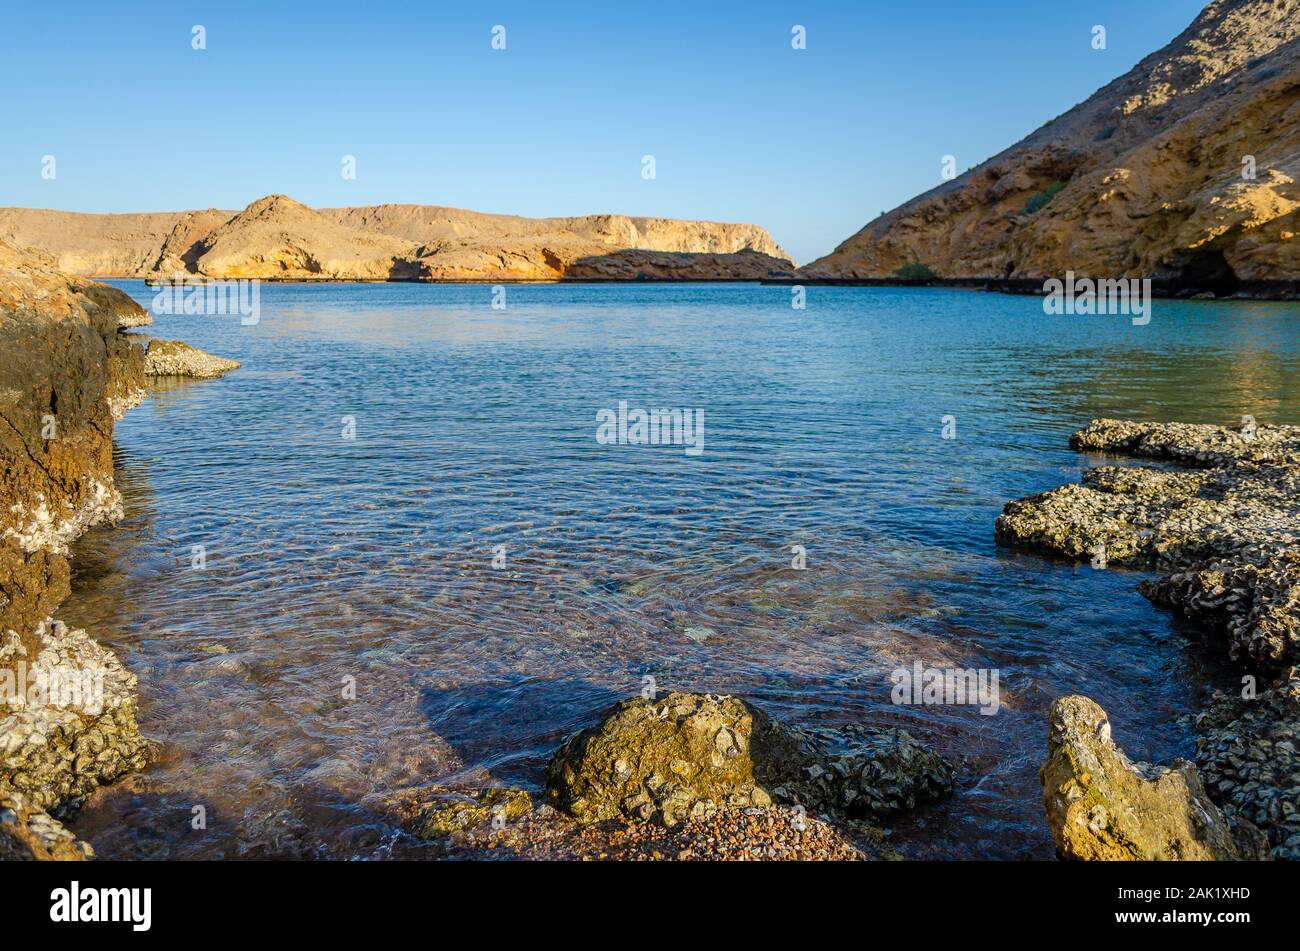 Tranquilizing view of a rocky beach in Muscat, Oman. Stock Photo